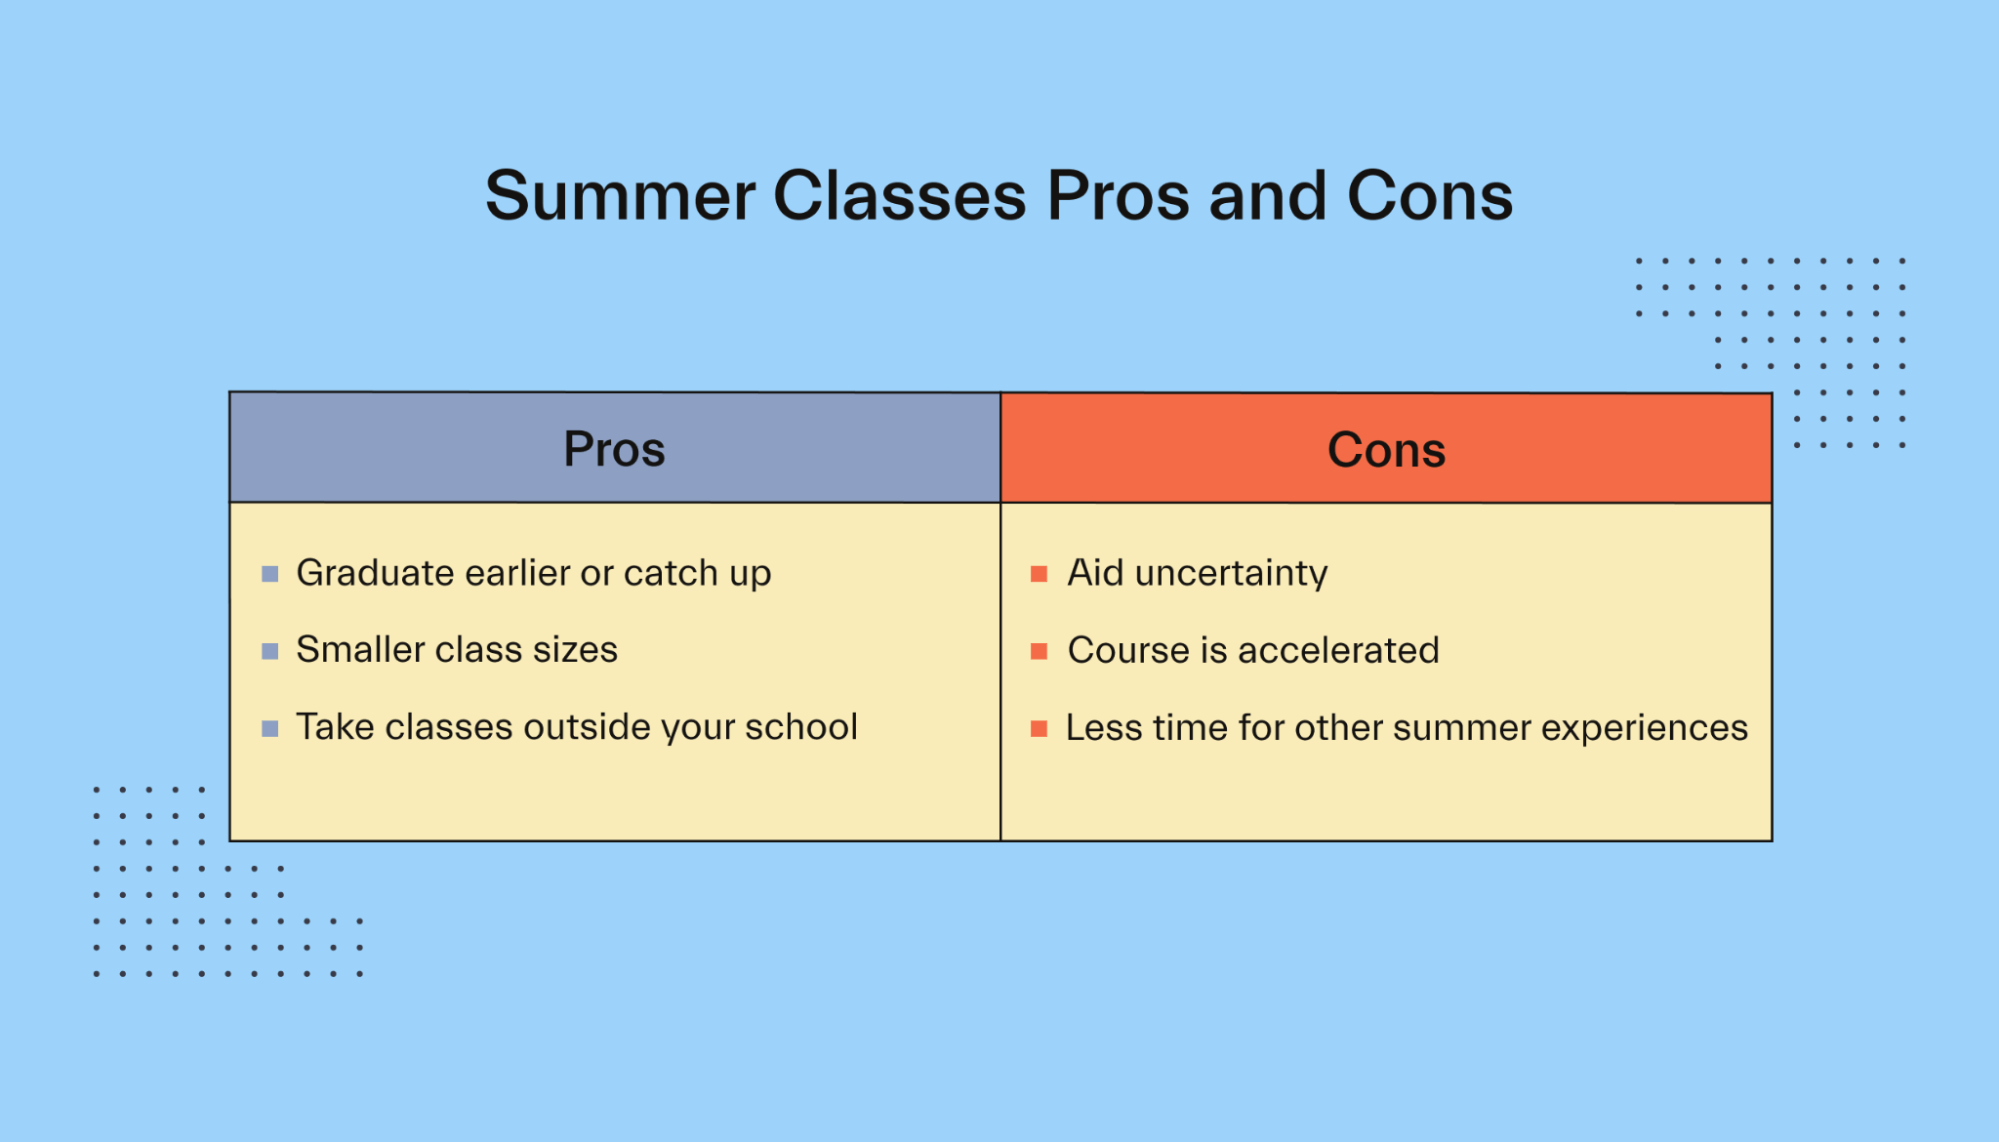 Summer Classes Pros and Cons